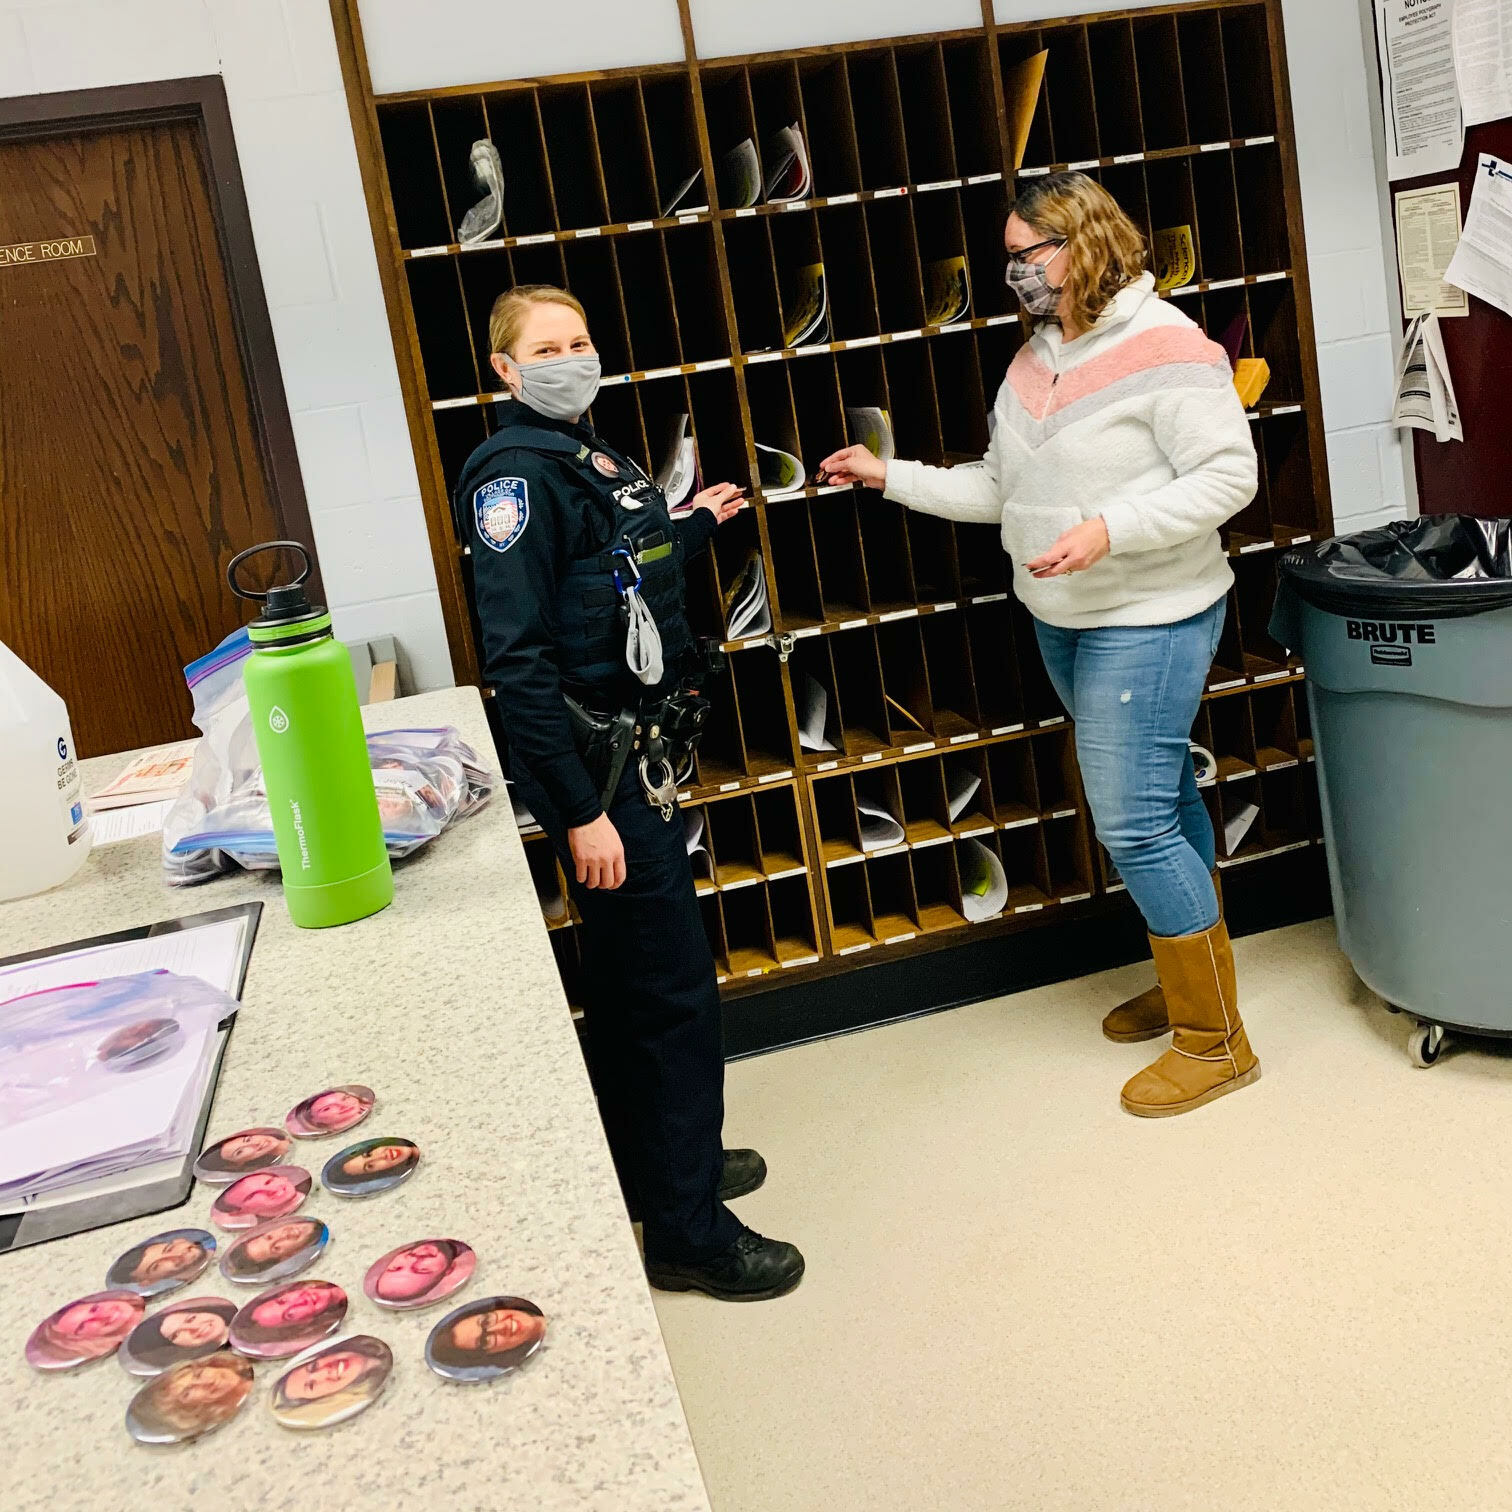 Officer Lisa McCulley and main office secretary Amy Davis also putting faculty buttons in mailboxes.